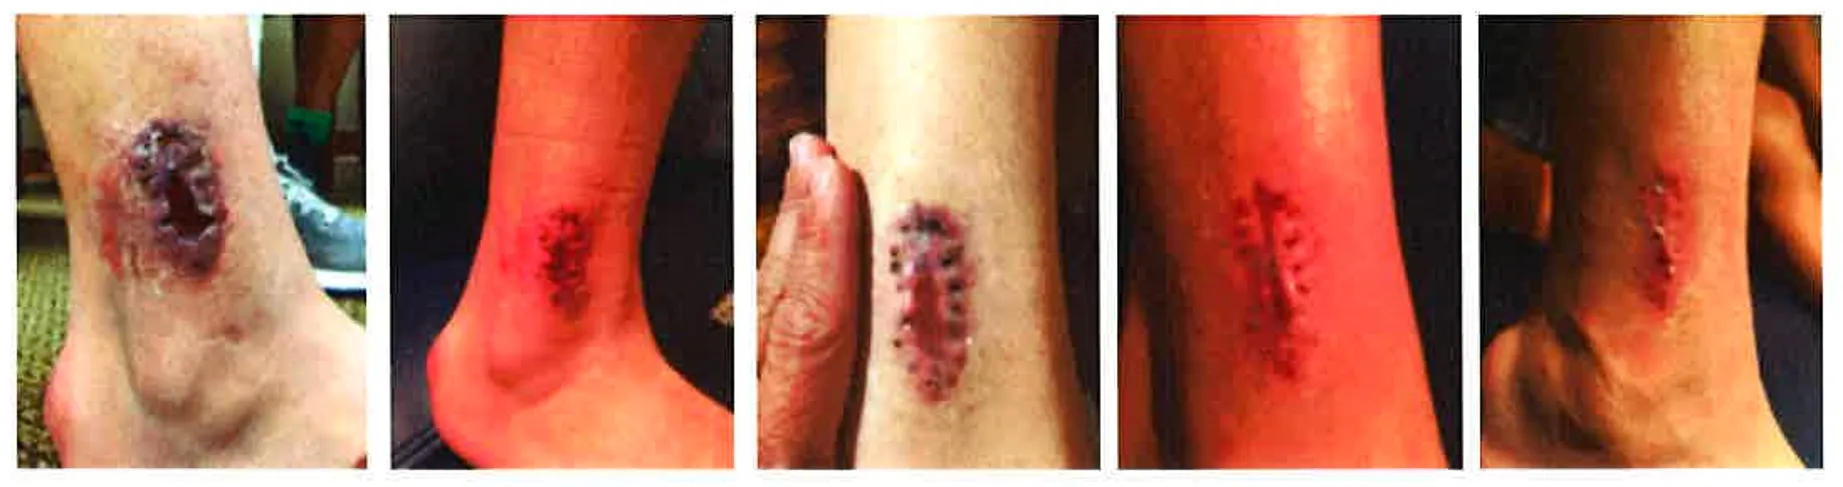 healing progress of surgical wound with Class IV laser therapy treatments